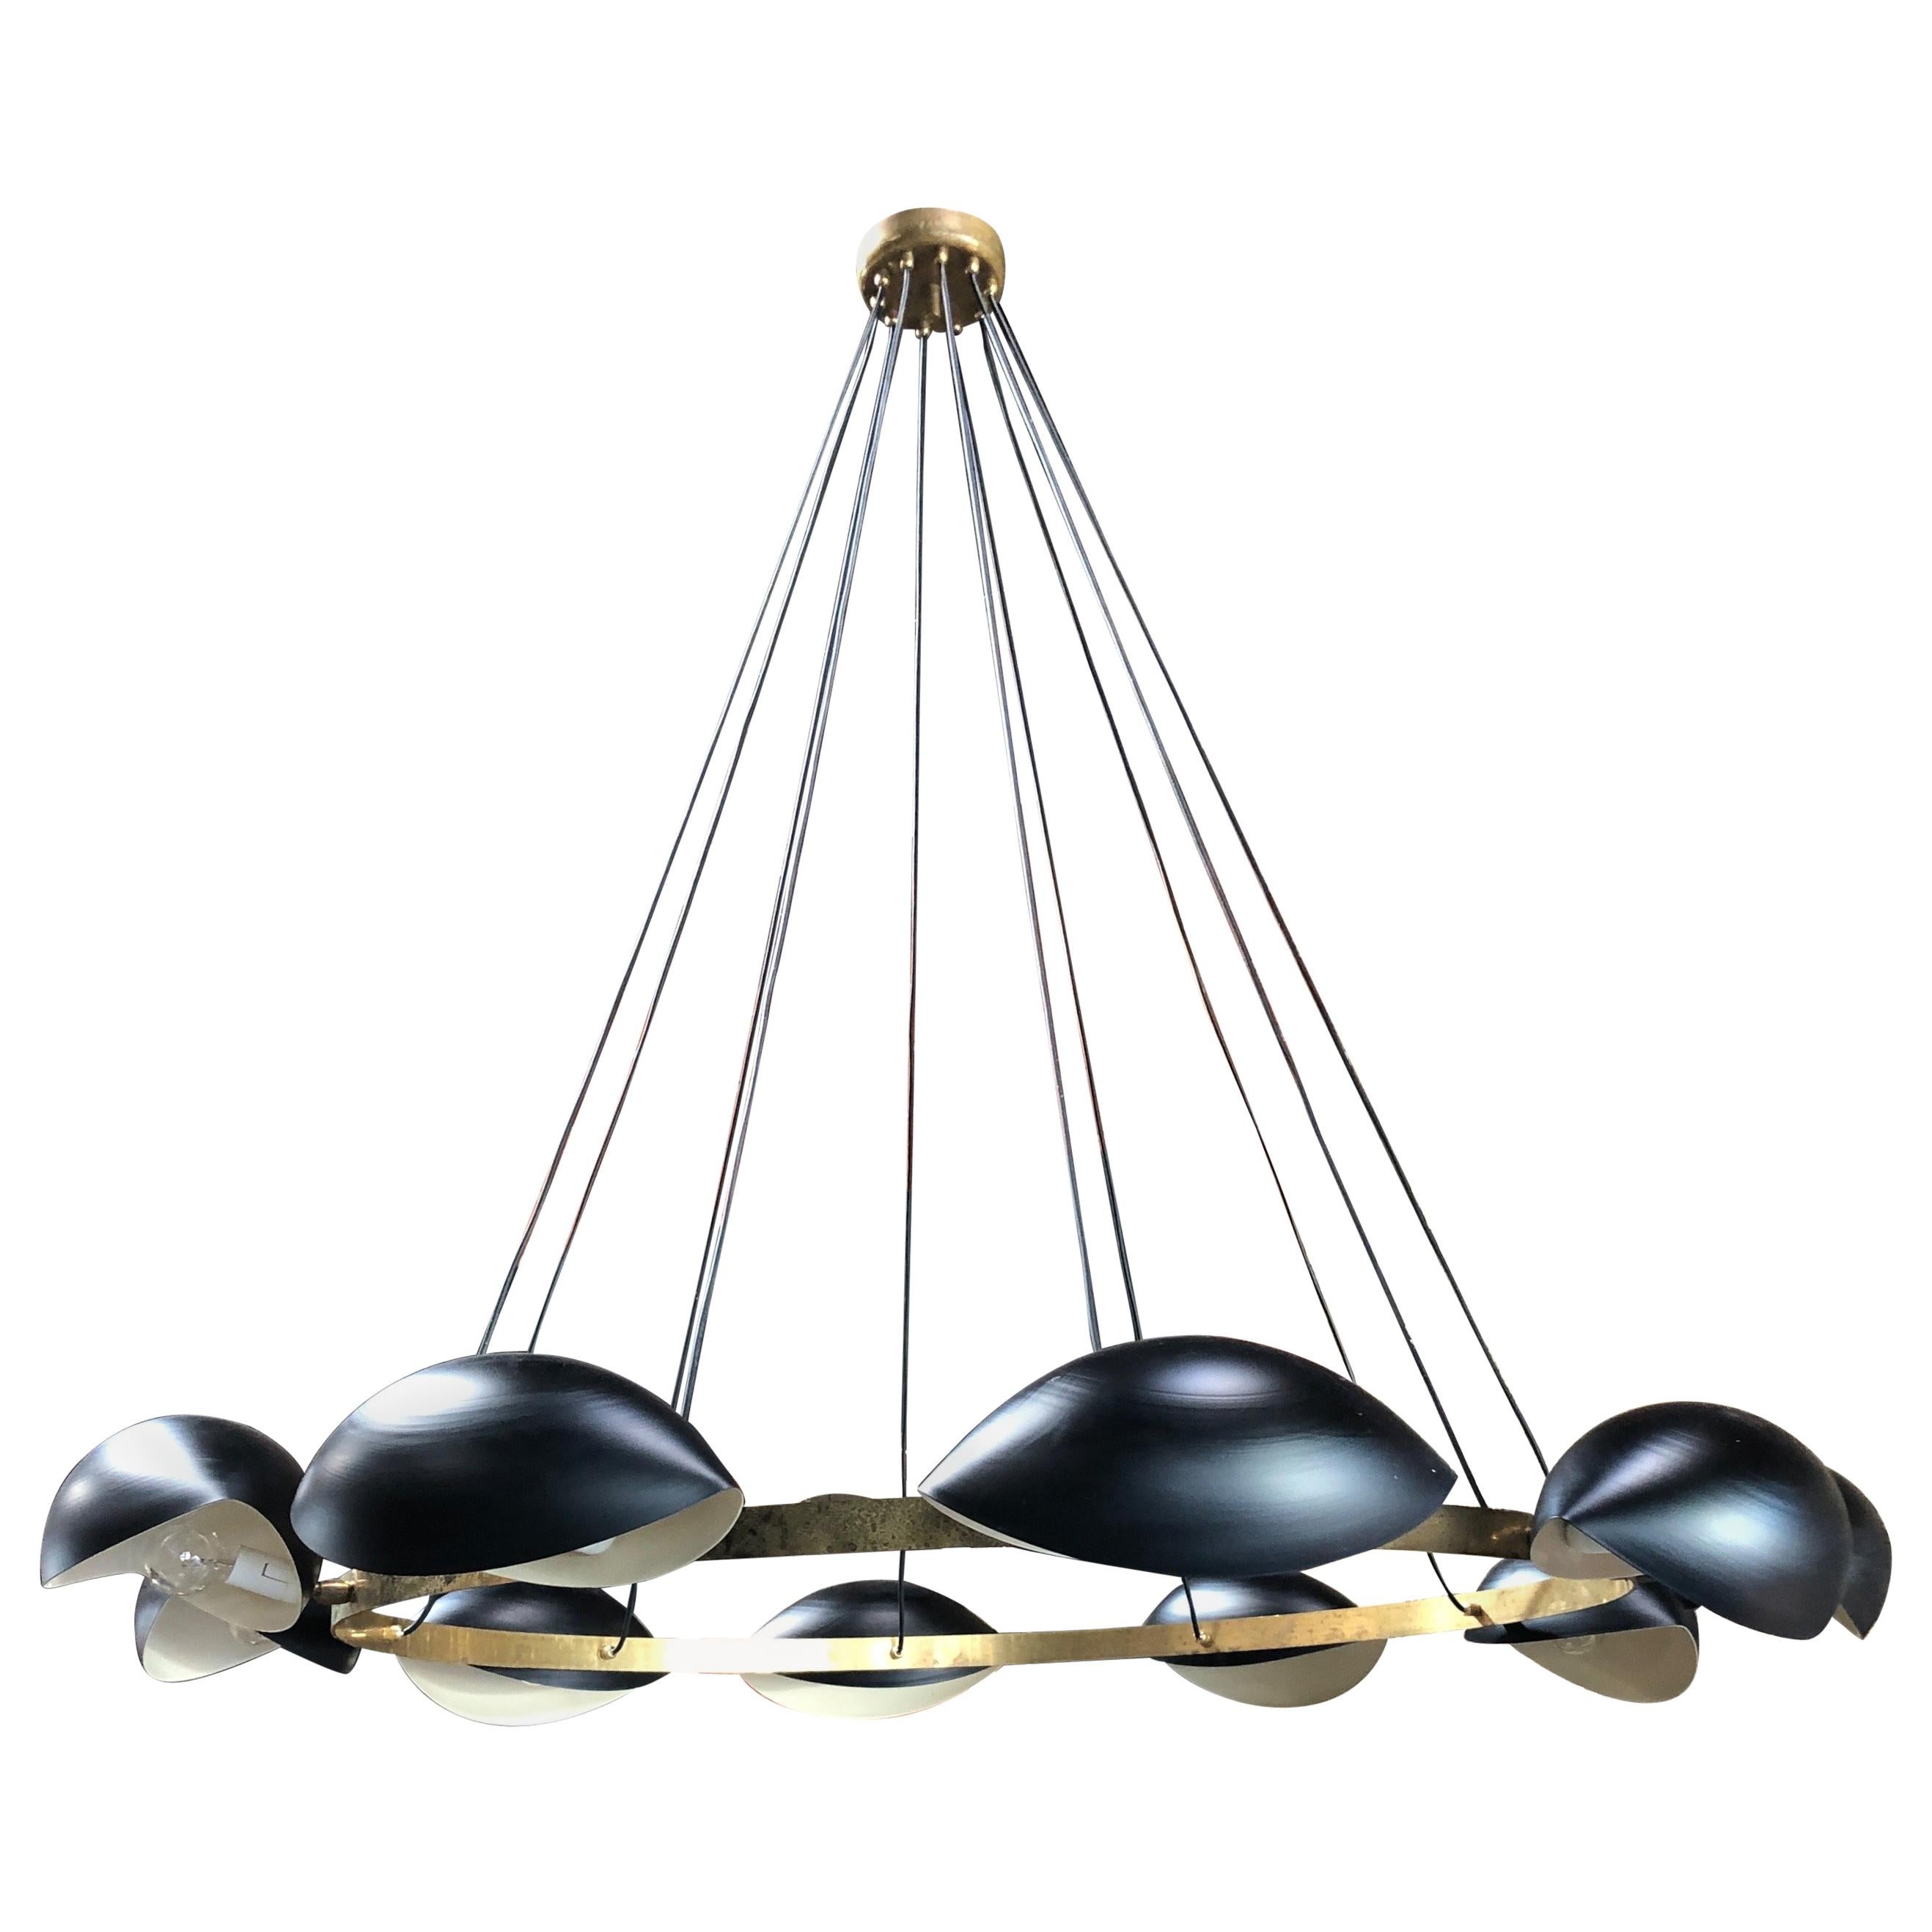 Vintage Oversize Round Brass Chandelier with 8 Lights, Italy, 1960s